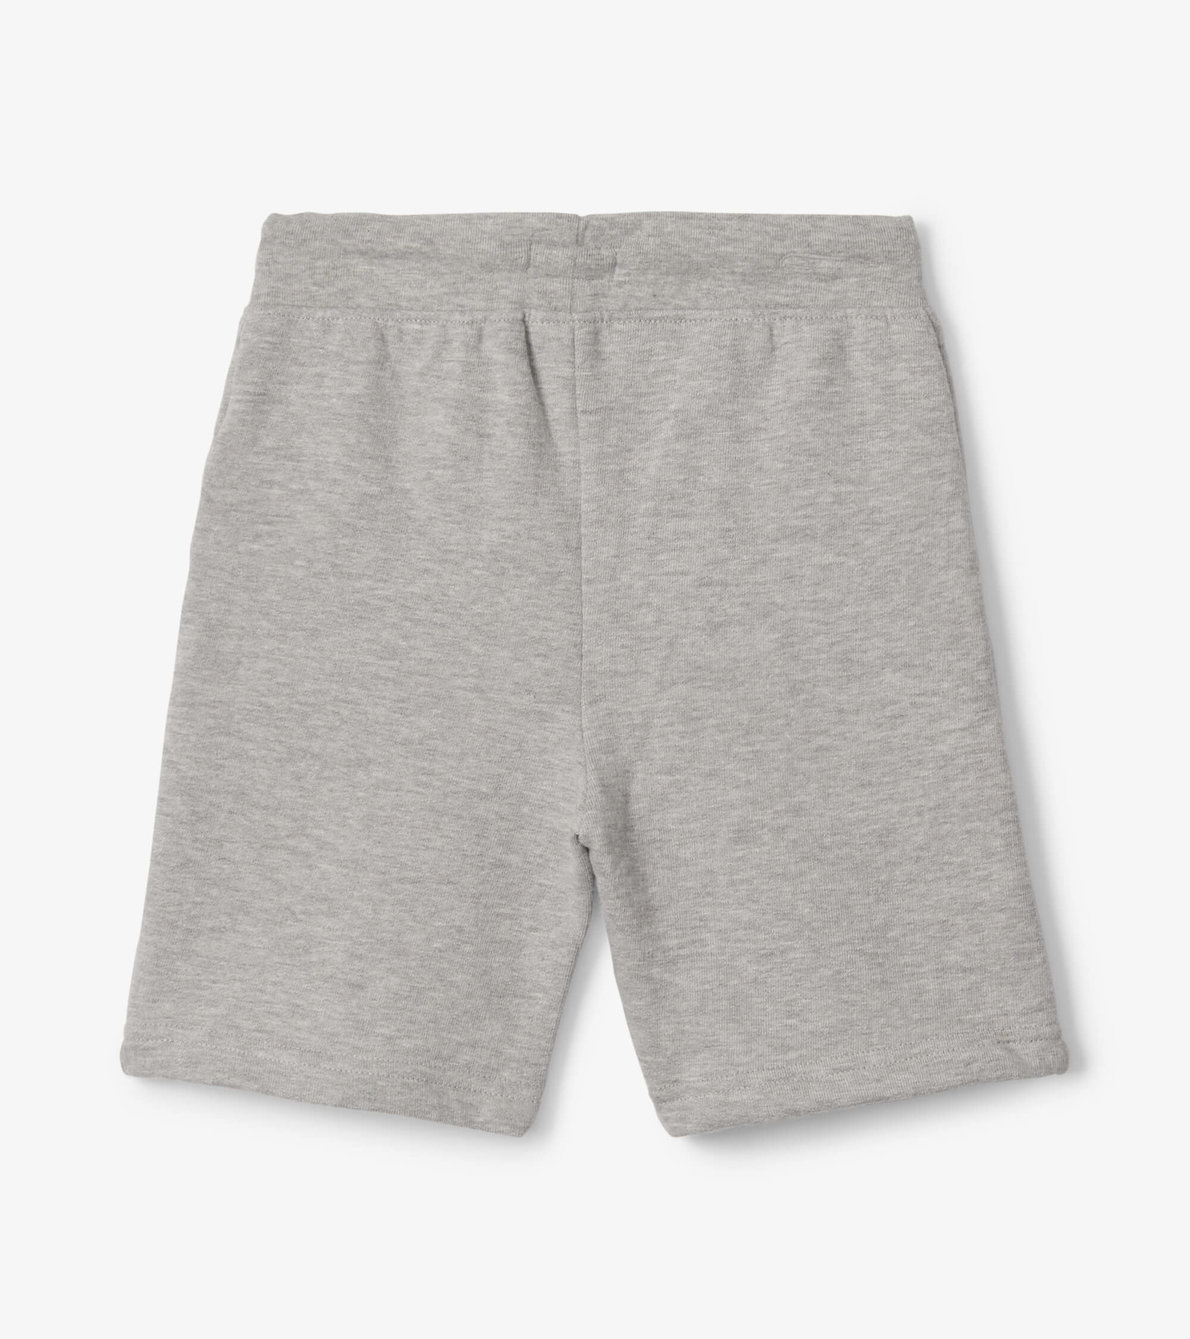 View larger image of Boys Athletic Grey Terry Shorts